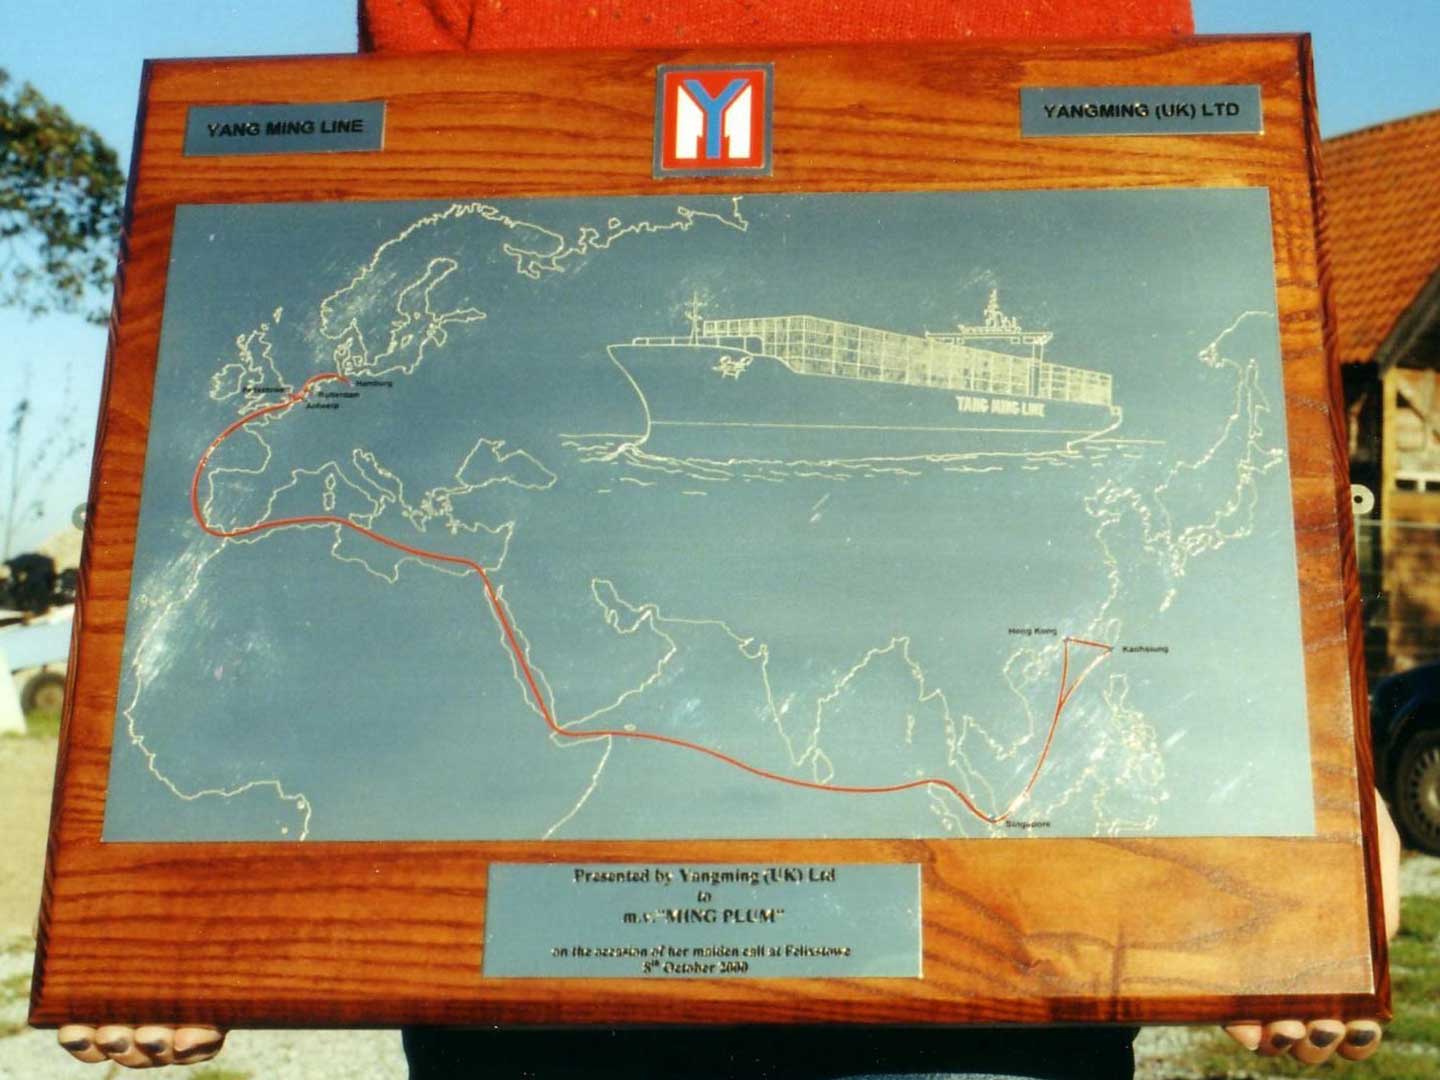 Mounted engraved plaque showing shipping route for Yang Ming Shipping